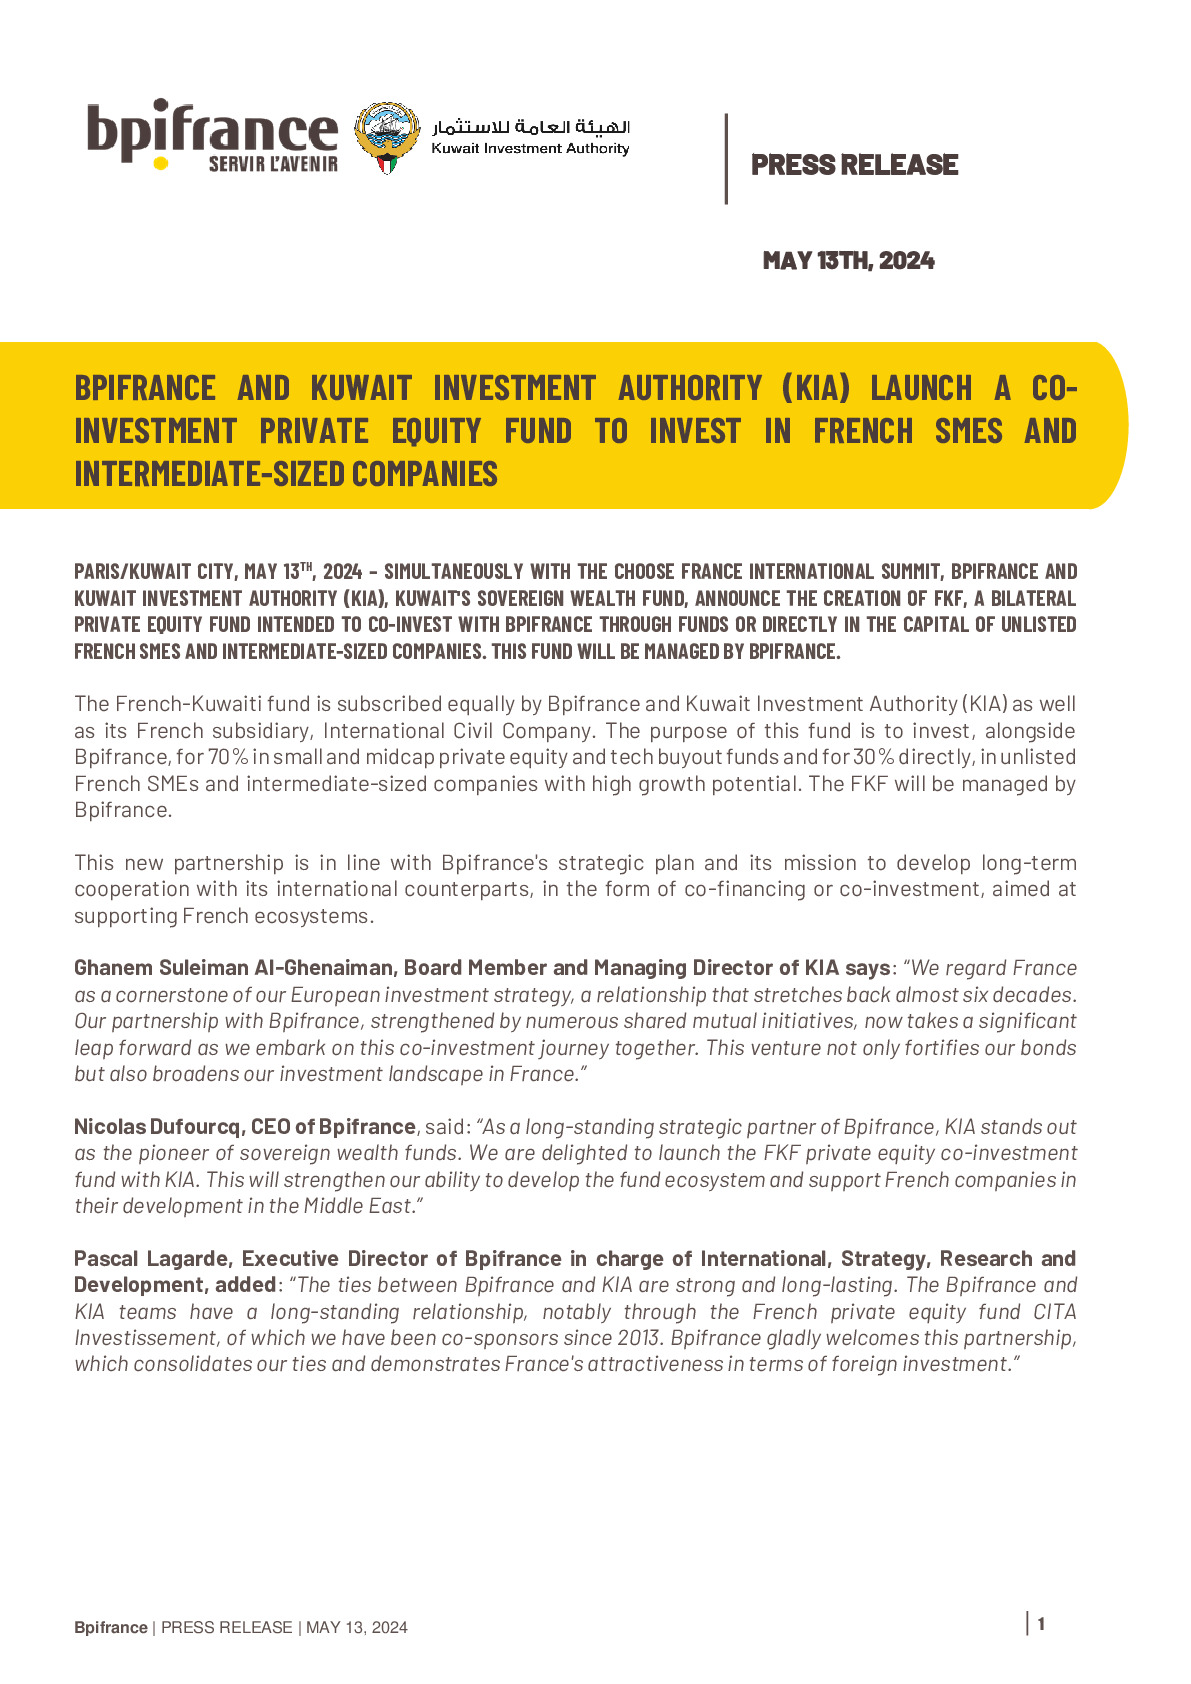 2024 05 13 – Bpifrance Press Release – Bpifrance and Kuwait Investment Authority launch a private equity co investment fund to invest in French SMES and MID-CAPS EN